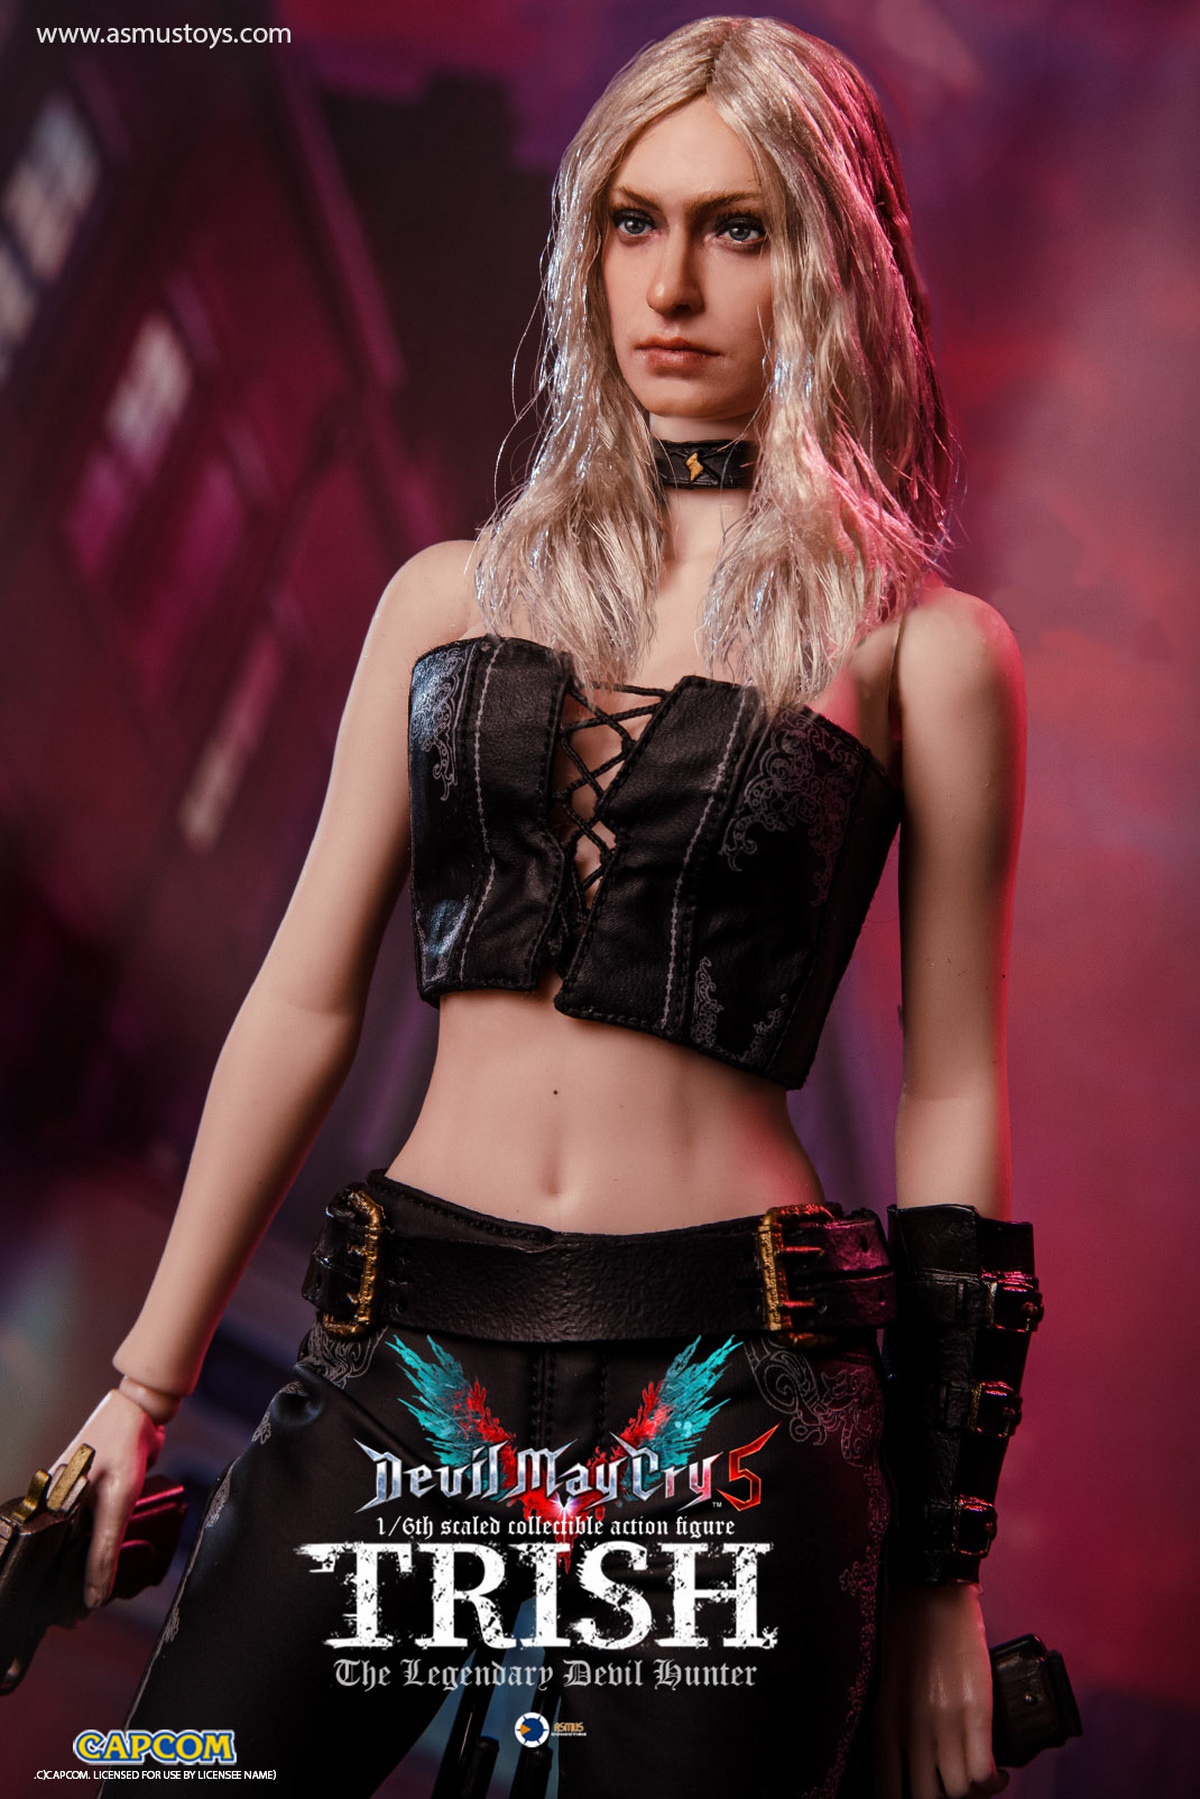 devilmaycry - NEW PRODUCT: Asmus New Toys: "Devil May Cry 5" - Trish (DMC504) 0623